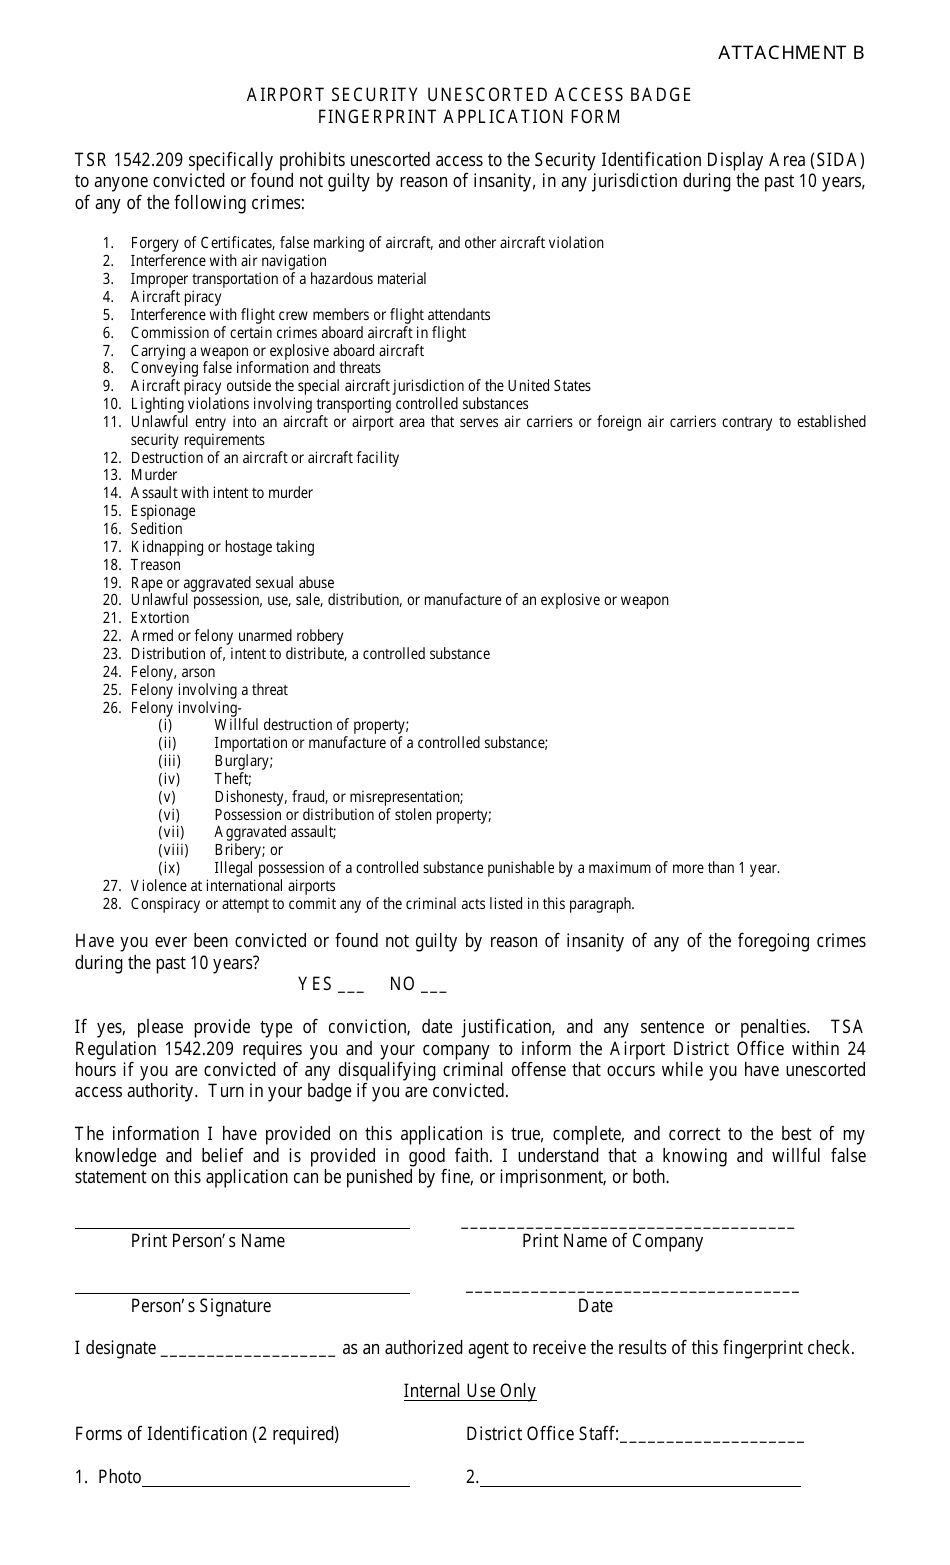 Attachment B Airport Security Unescorted Access Badge Fingerprint Application Form - Hawaii, Page 1